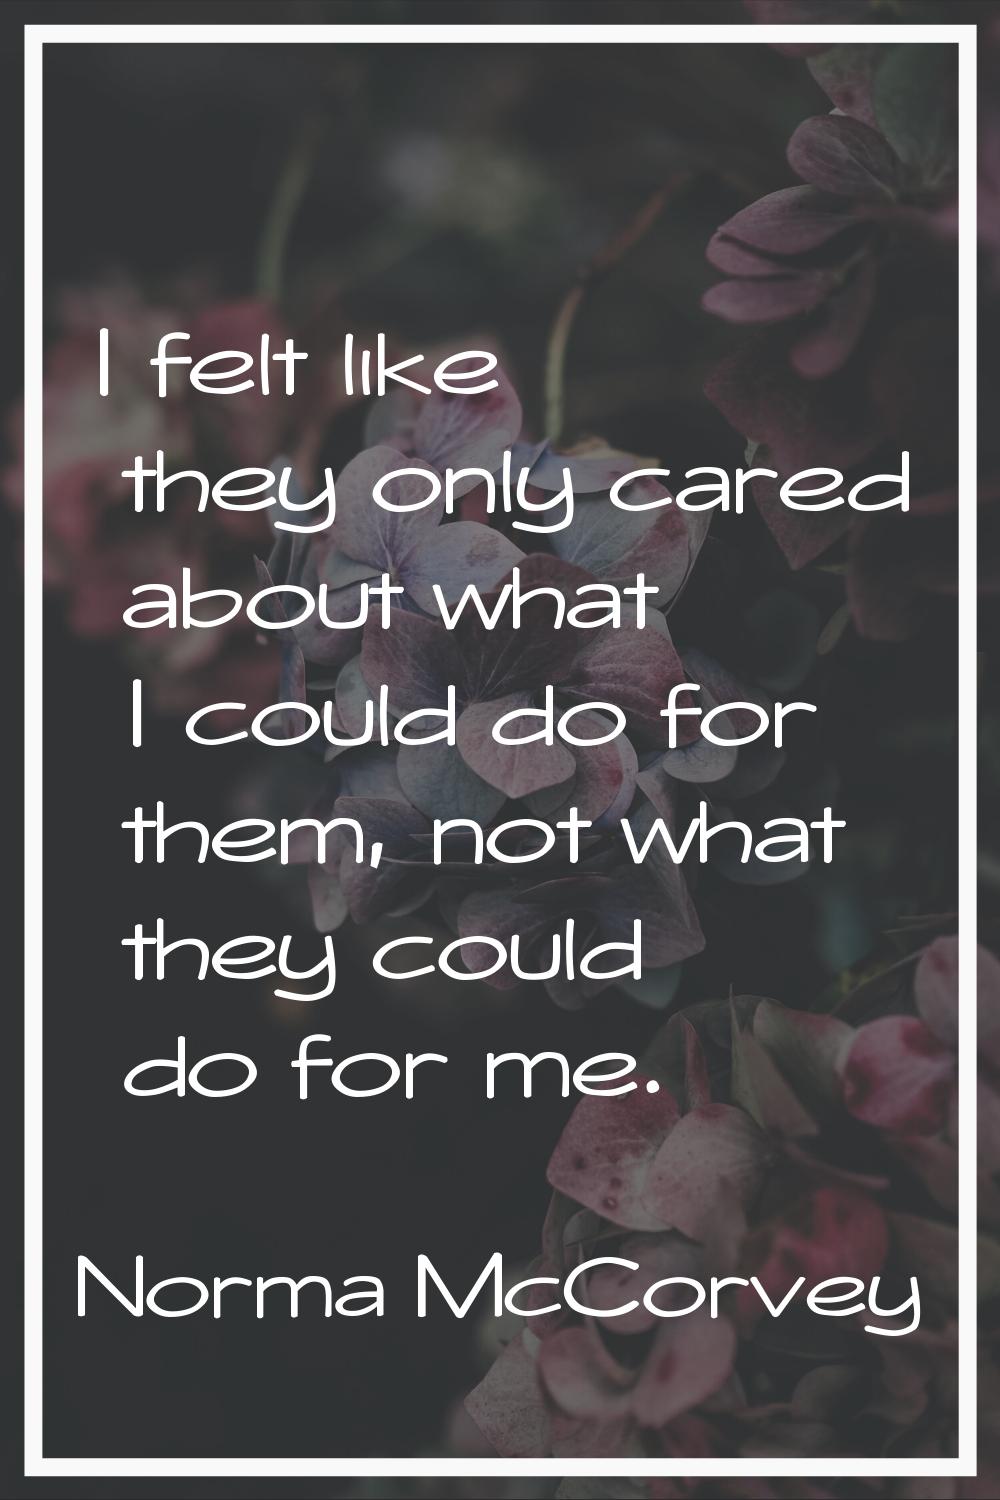 I felt like they only cared about what I could do for them, not what they could do for me.